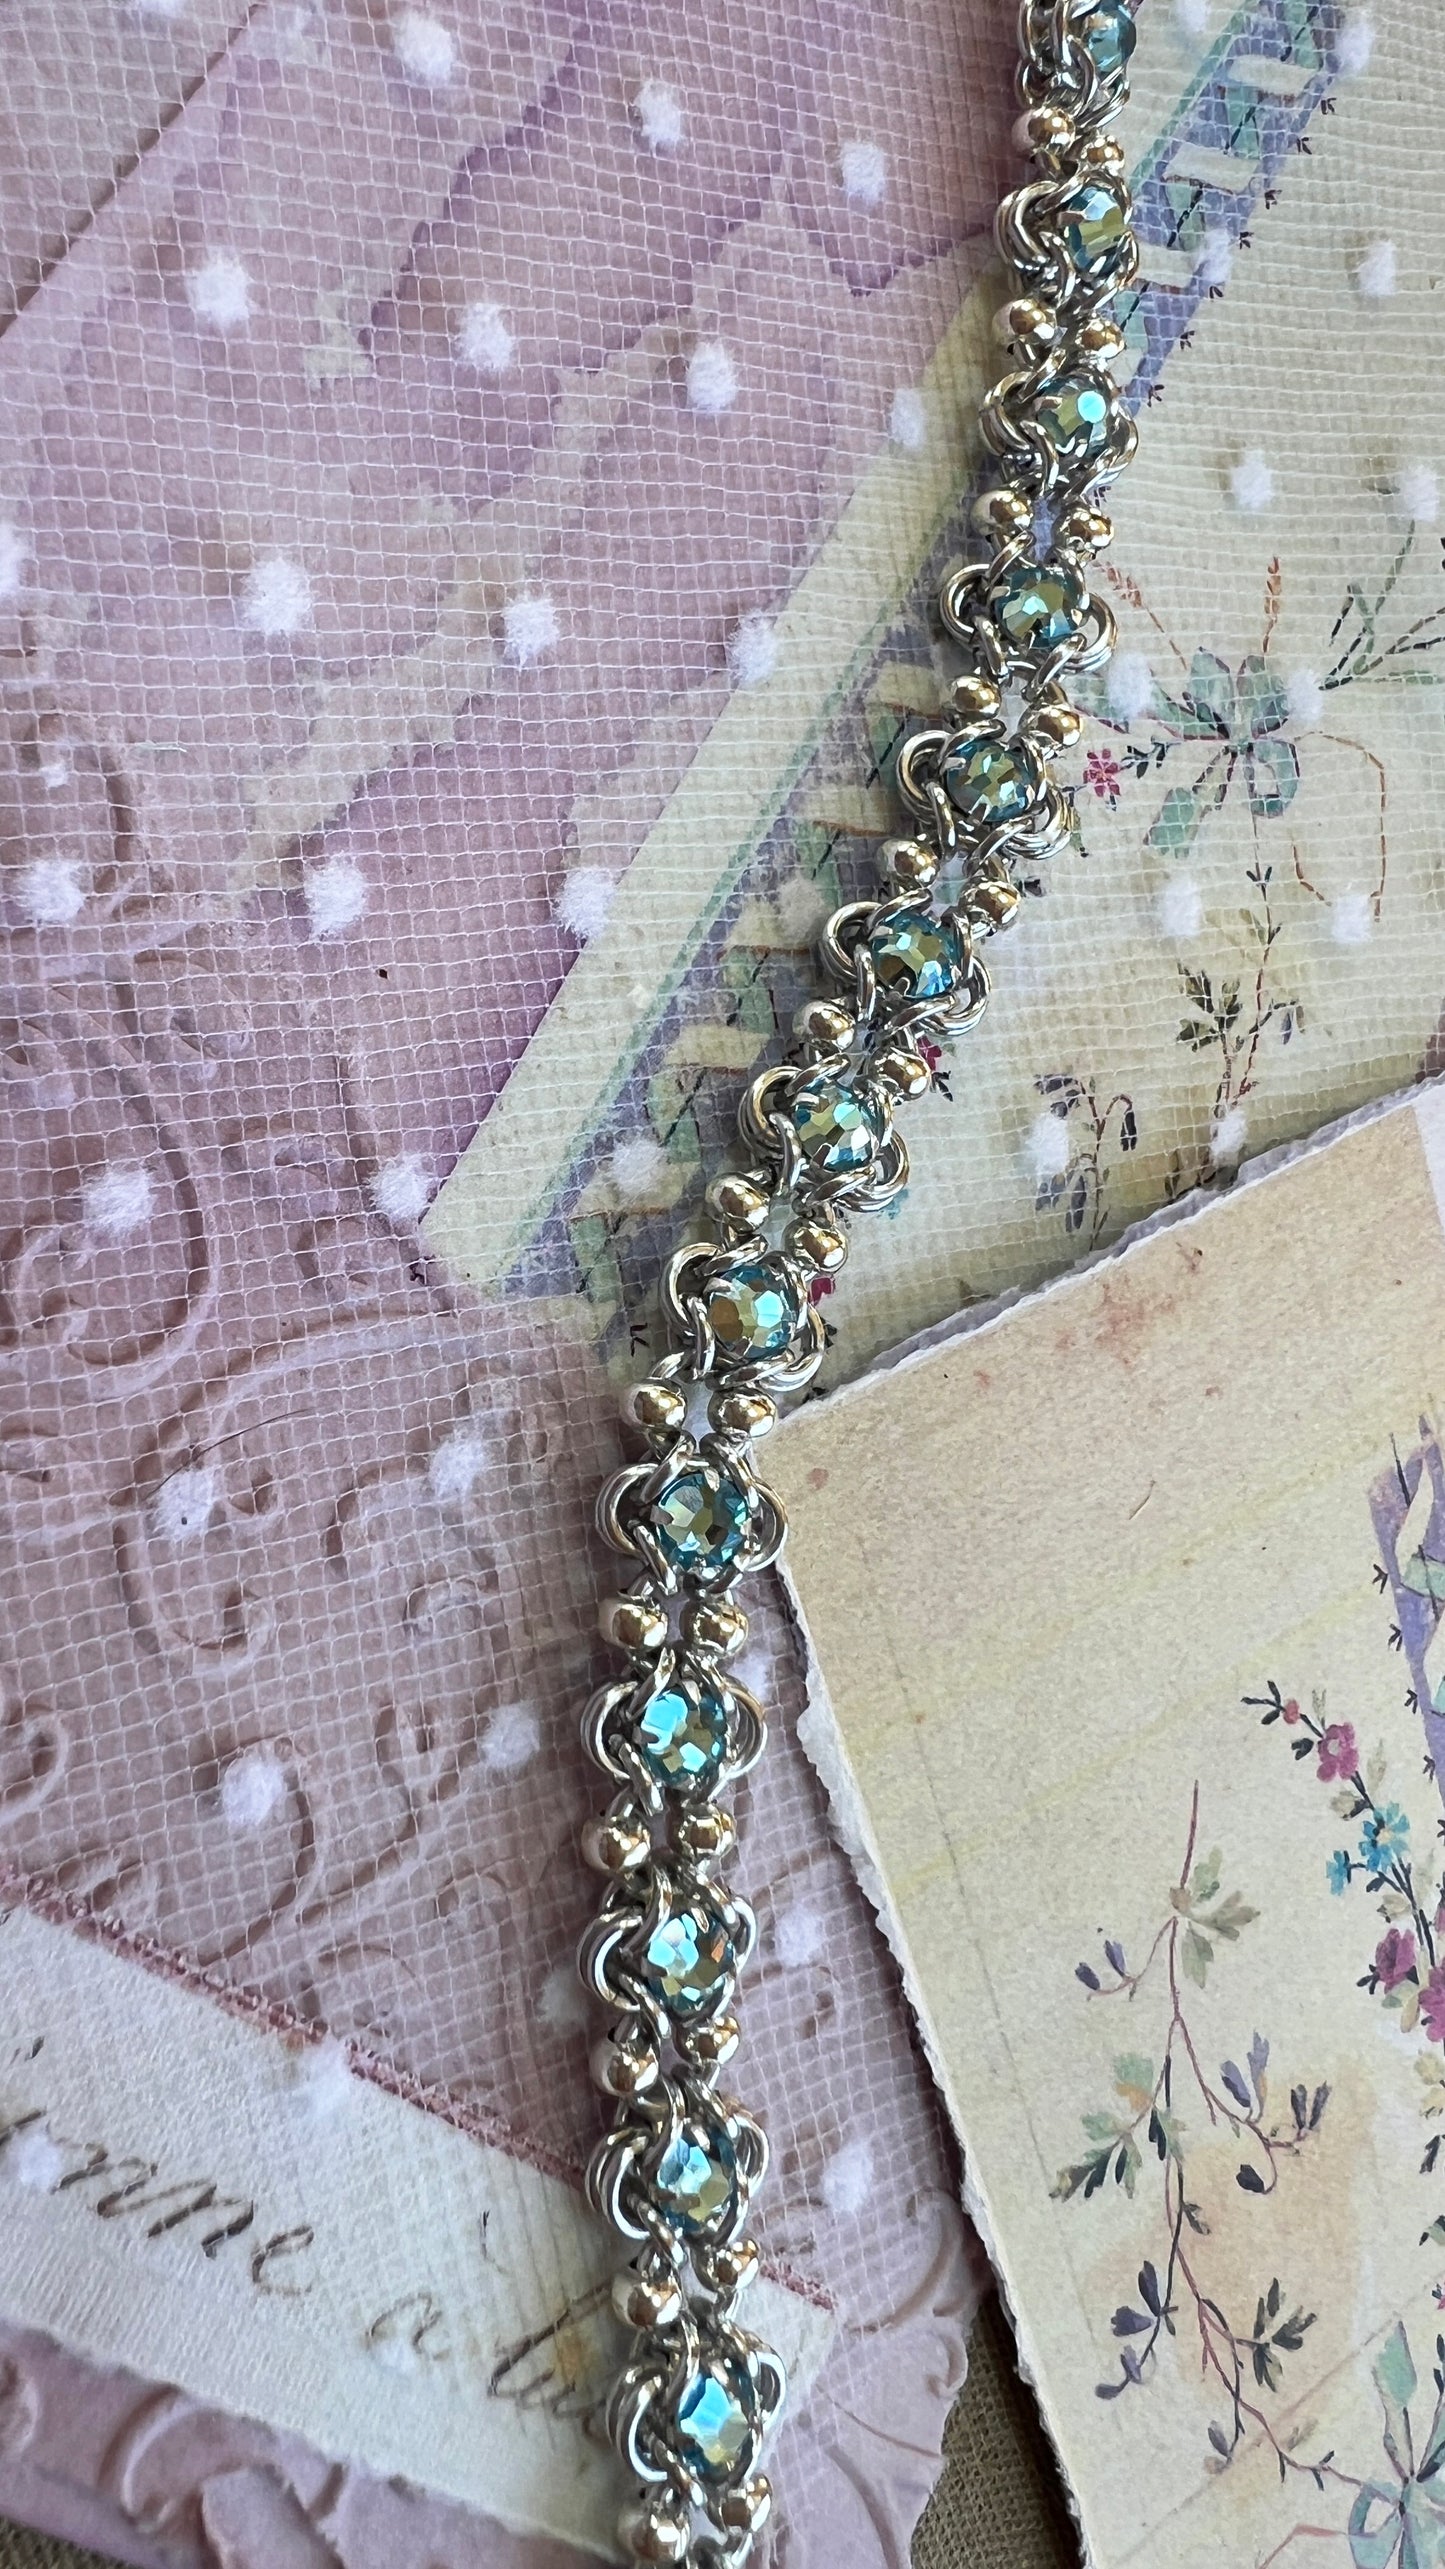 Reversible Rose Montee Beaded Bracelet Kit with Video Tutorial - Silver, Aquamarine and Violet